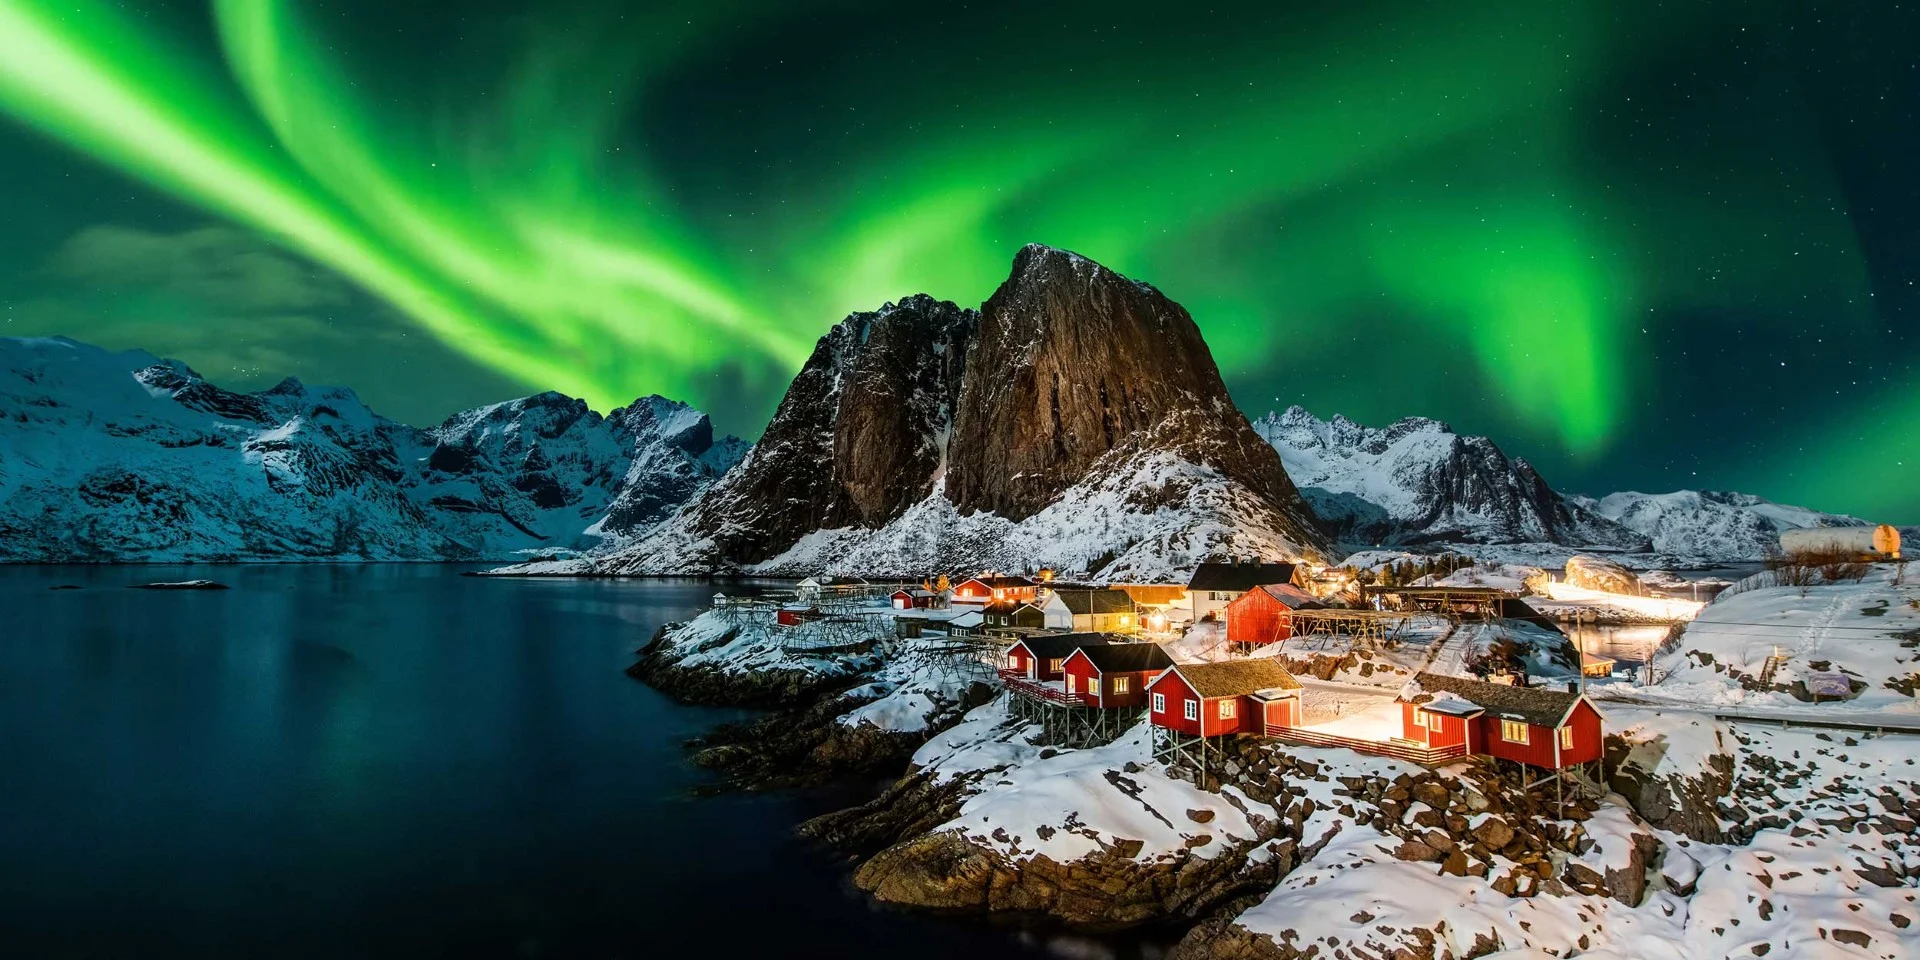 The Northern Lights dancing over Hamnoy in the Lofoten archipelago.